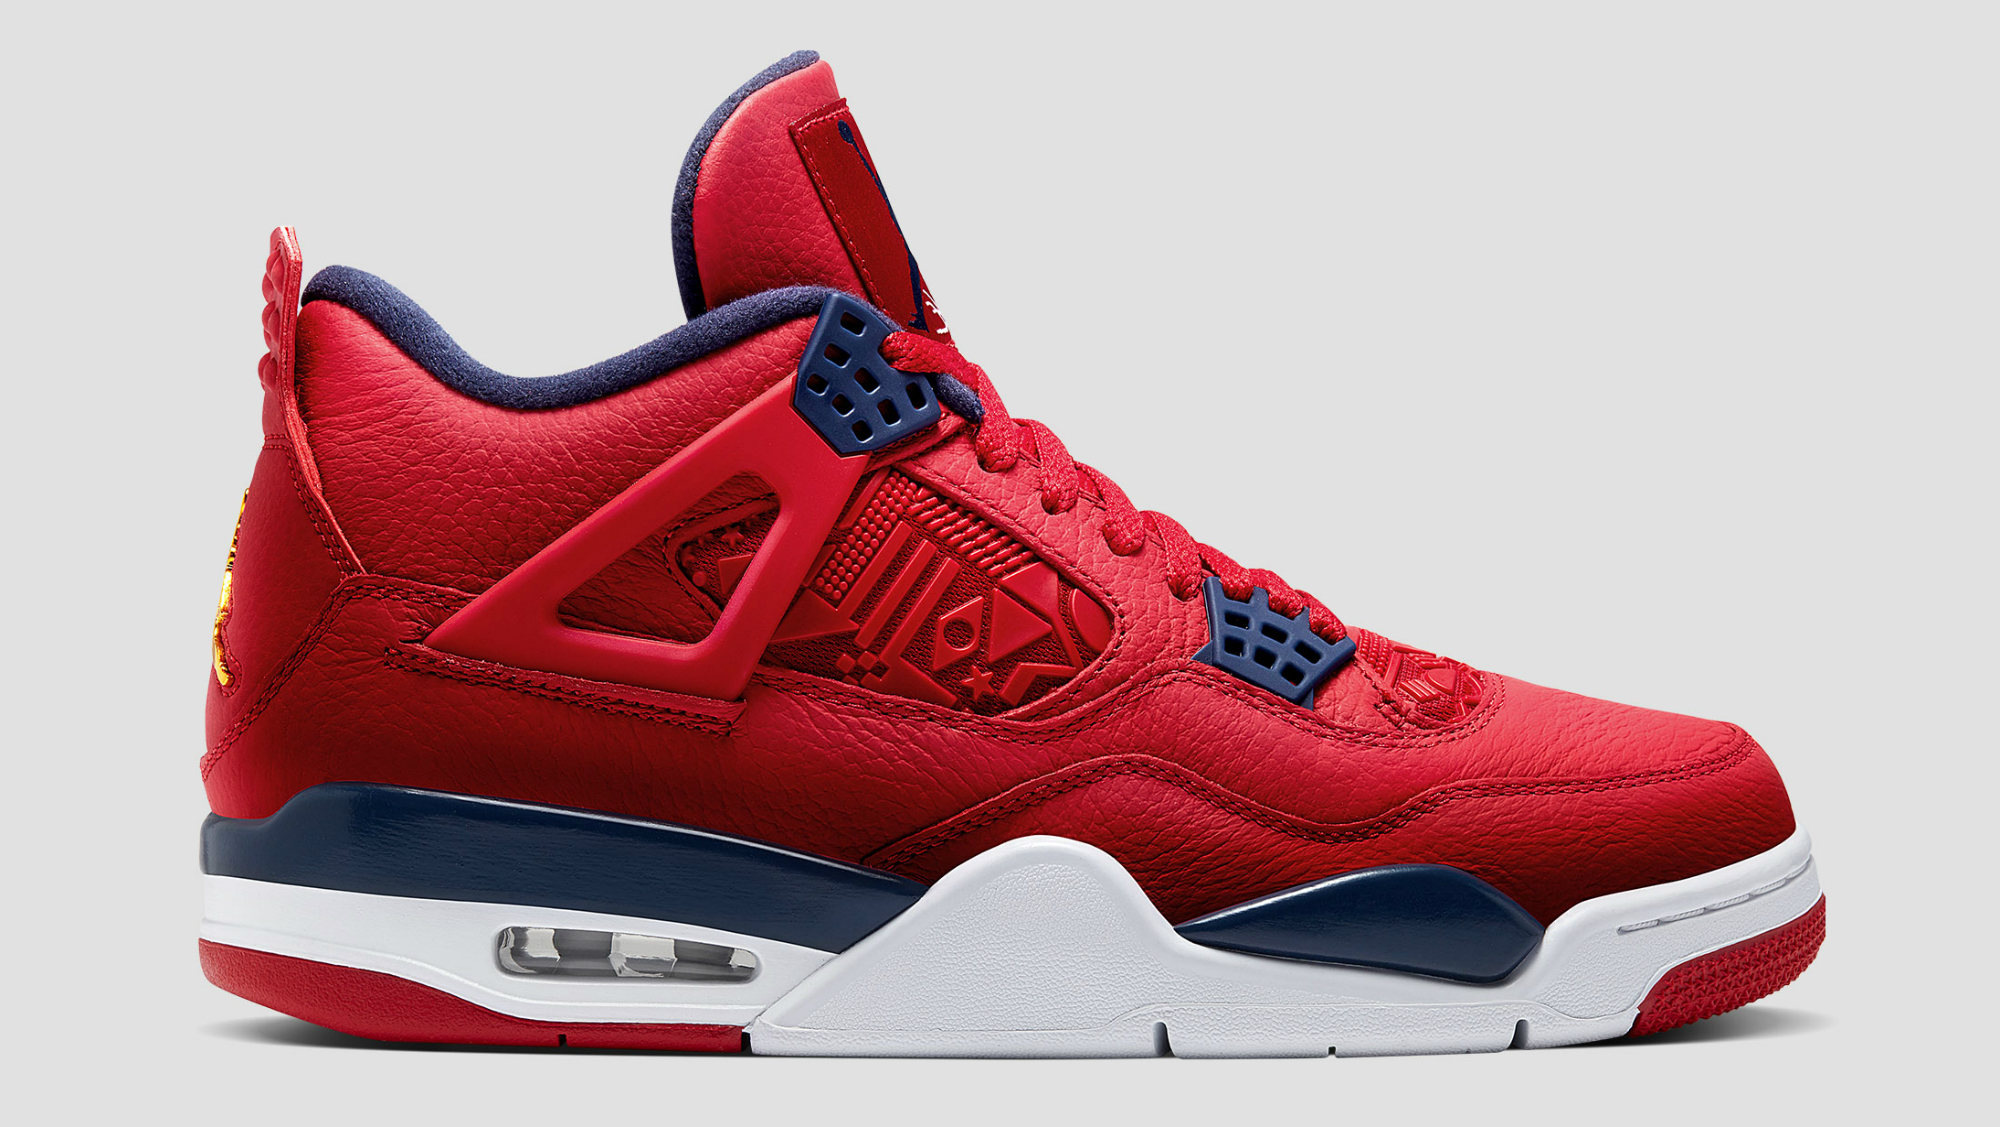 the red and blue jordans